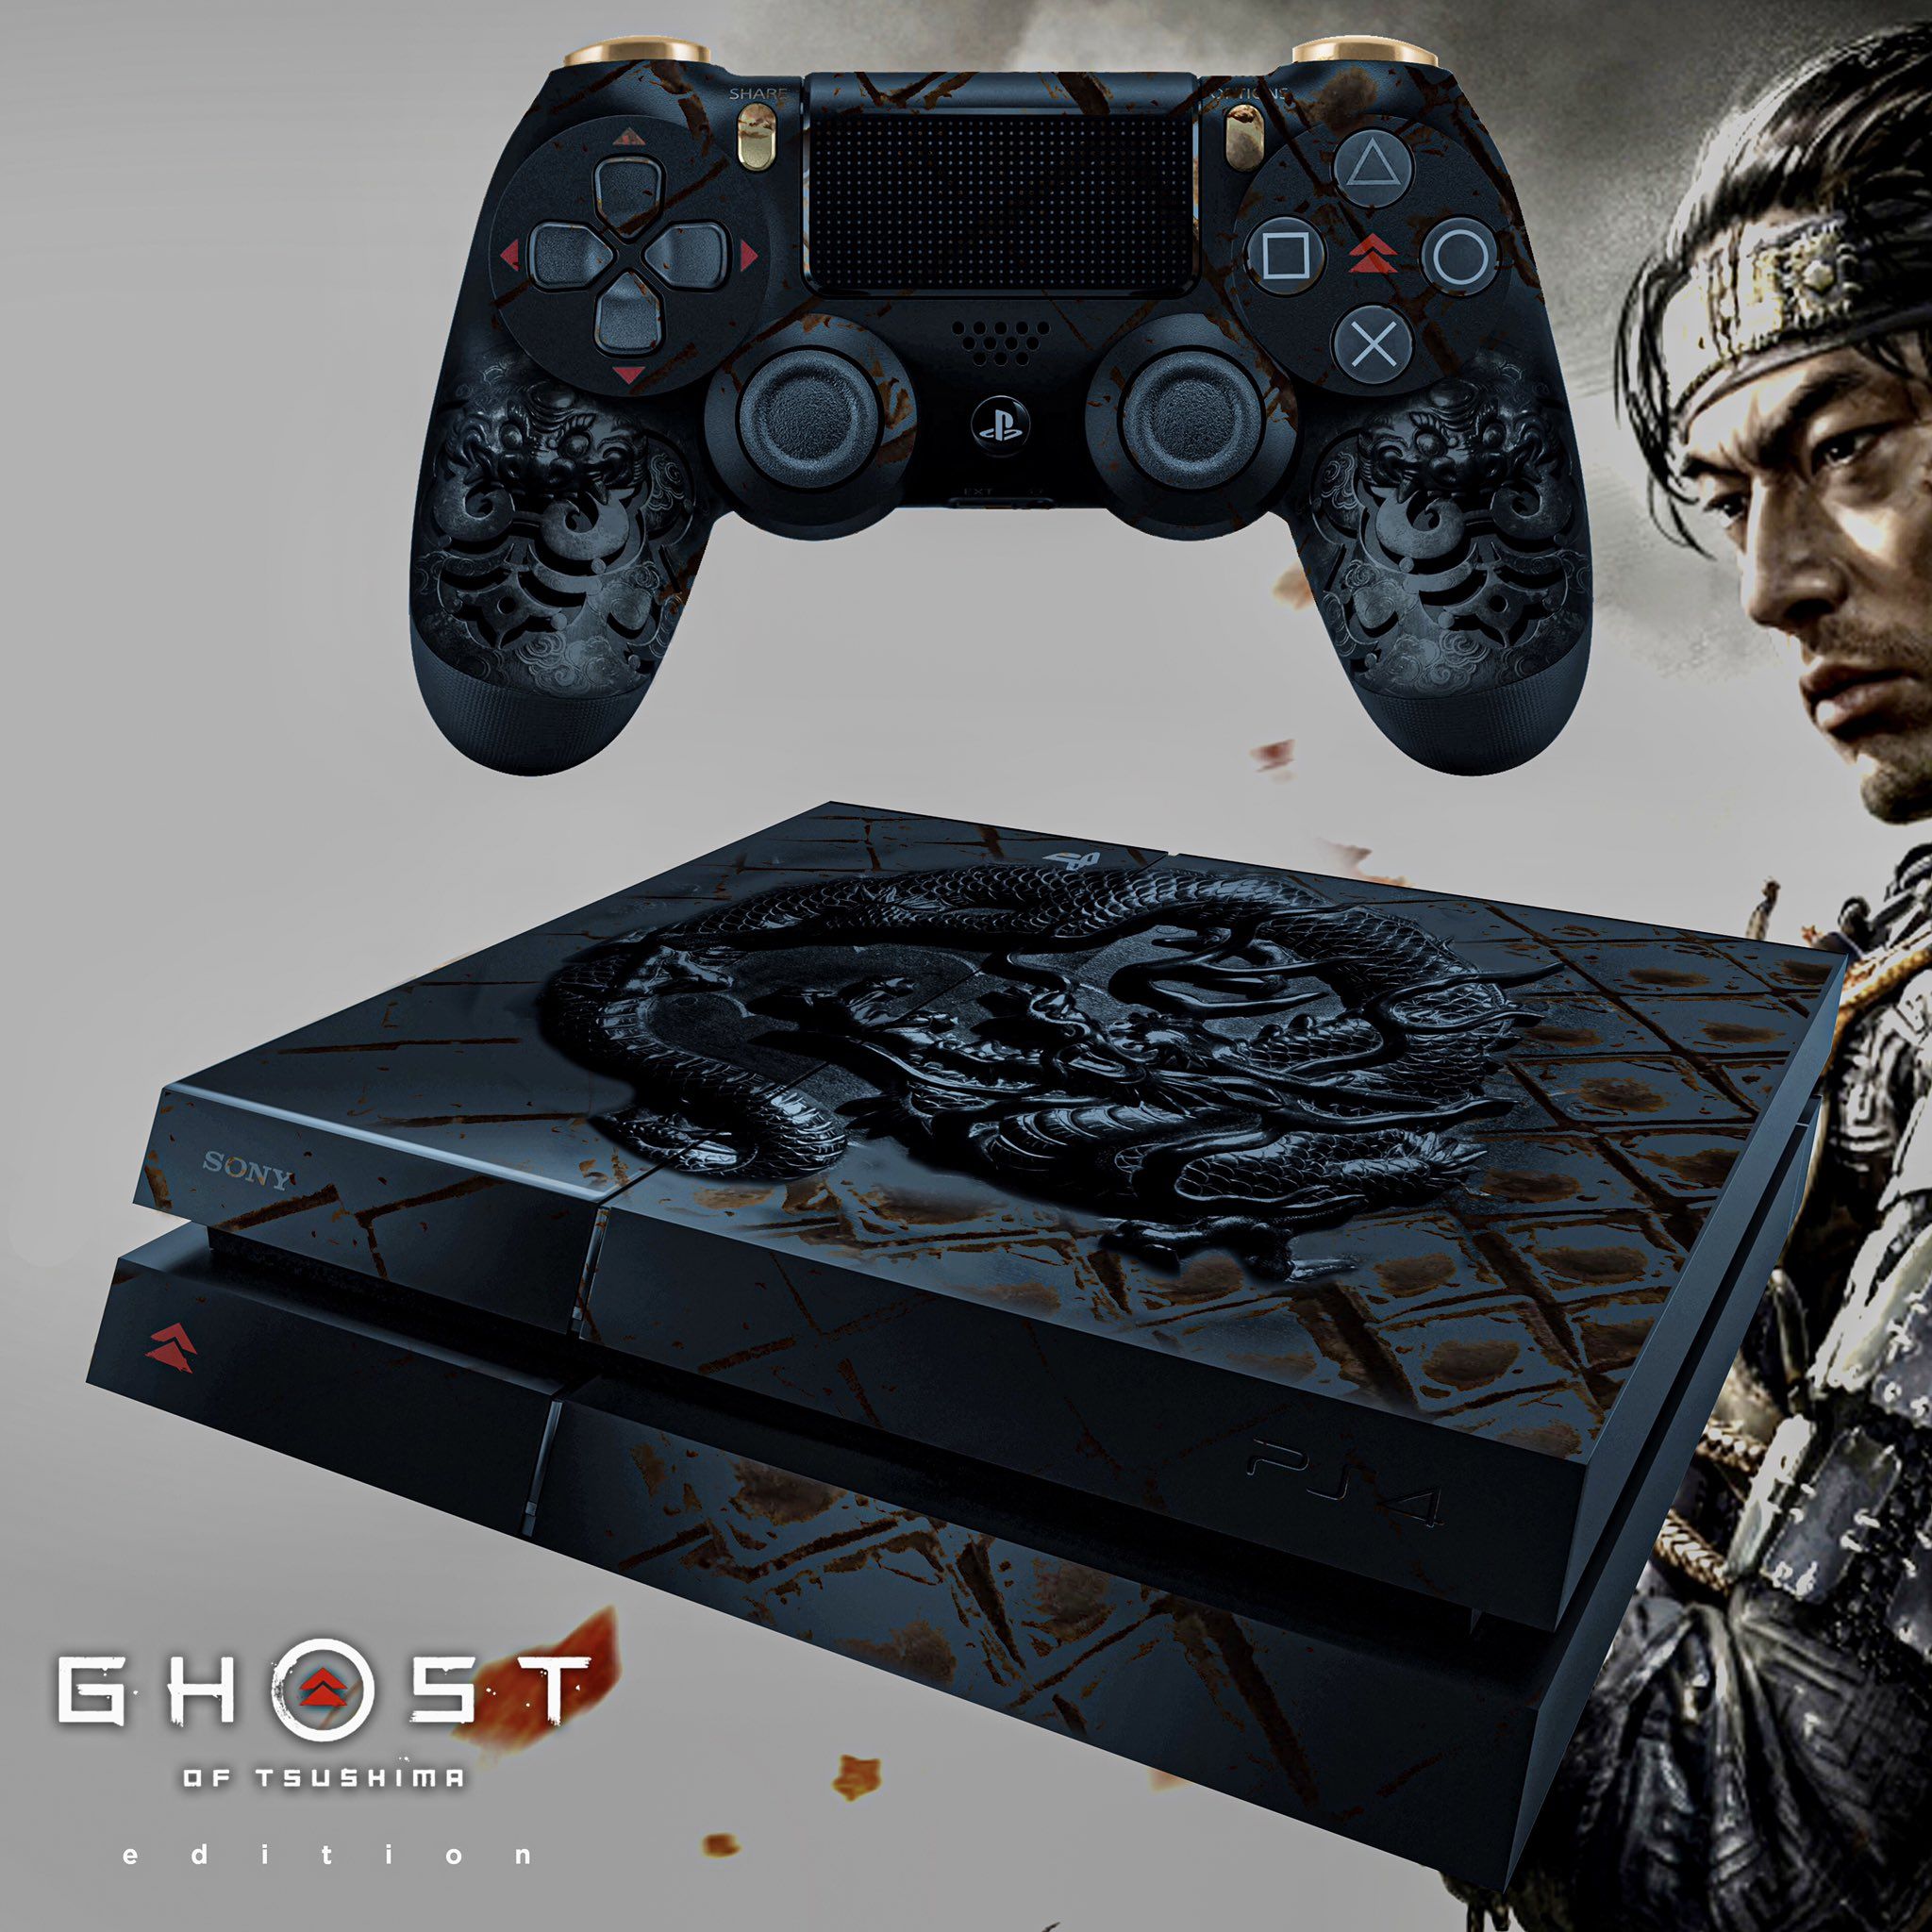 of Ghost Is Design for a Samurai PS4 Fit Tsushima Inspired